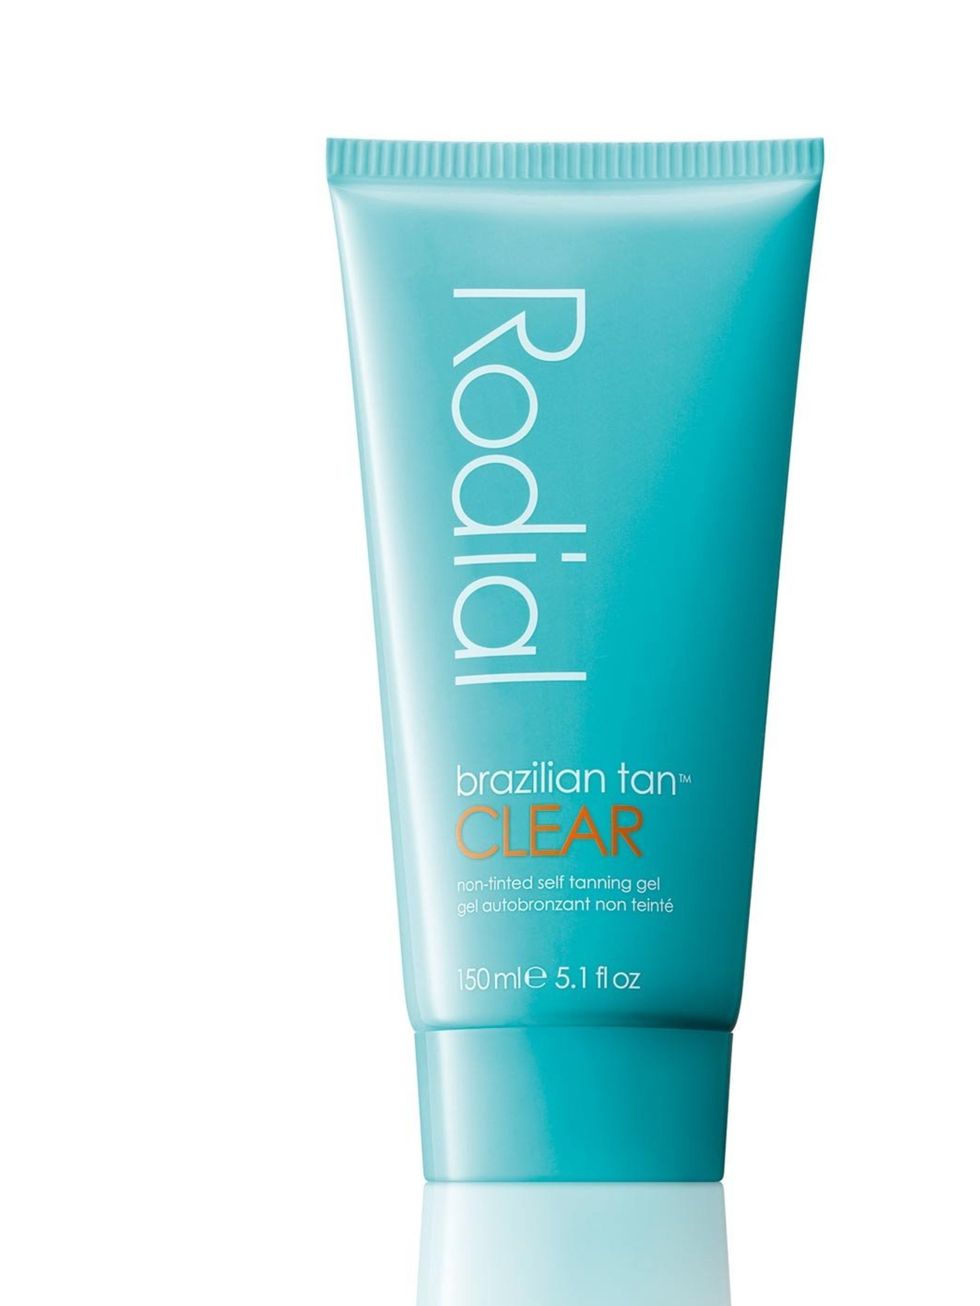 <p><a href="http://www.rodial.co.uk/product/Perfect-glow-tanning-Products/brazilian-tan-CLEAR/355">Rodial</a> Brazilian Tan Clear, £35</p>